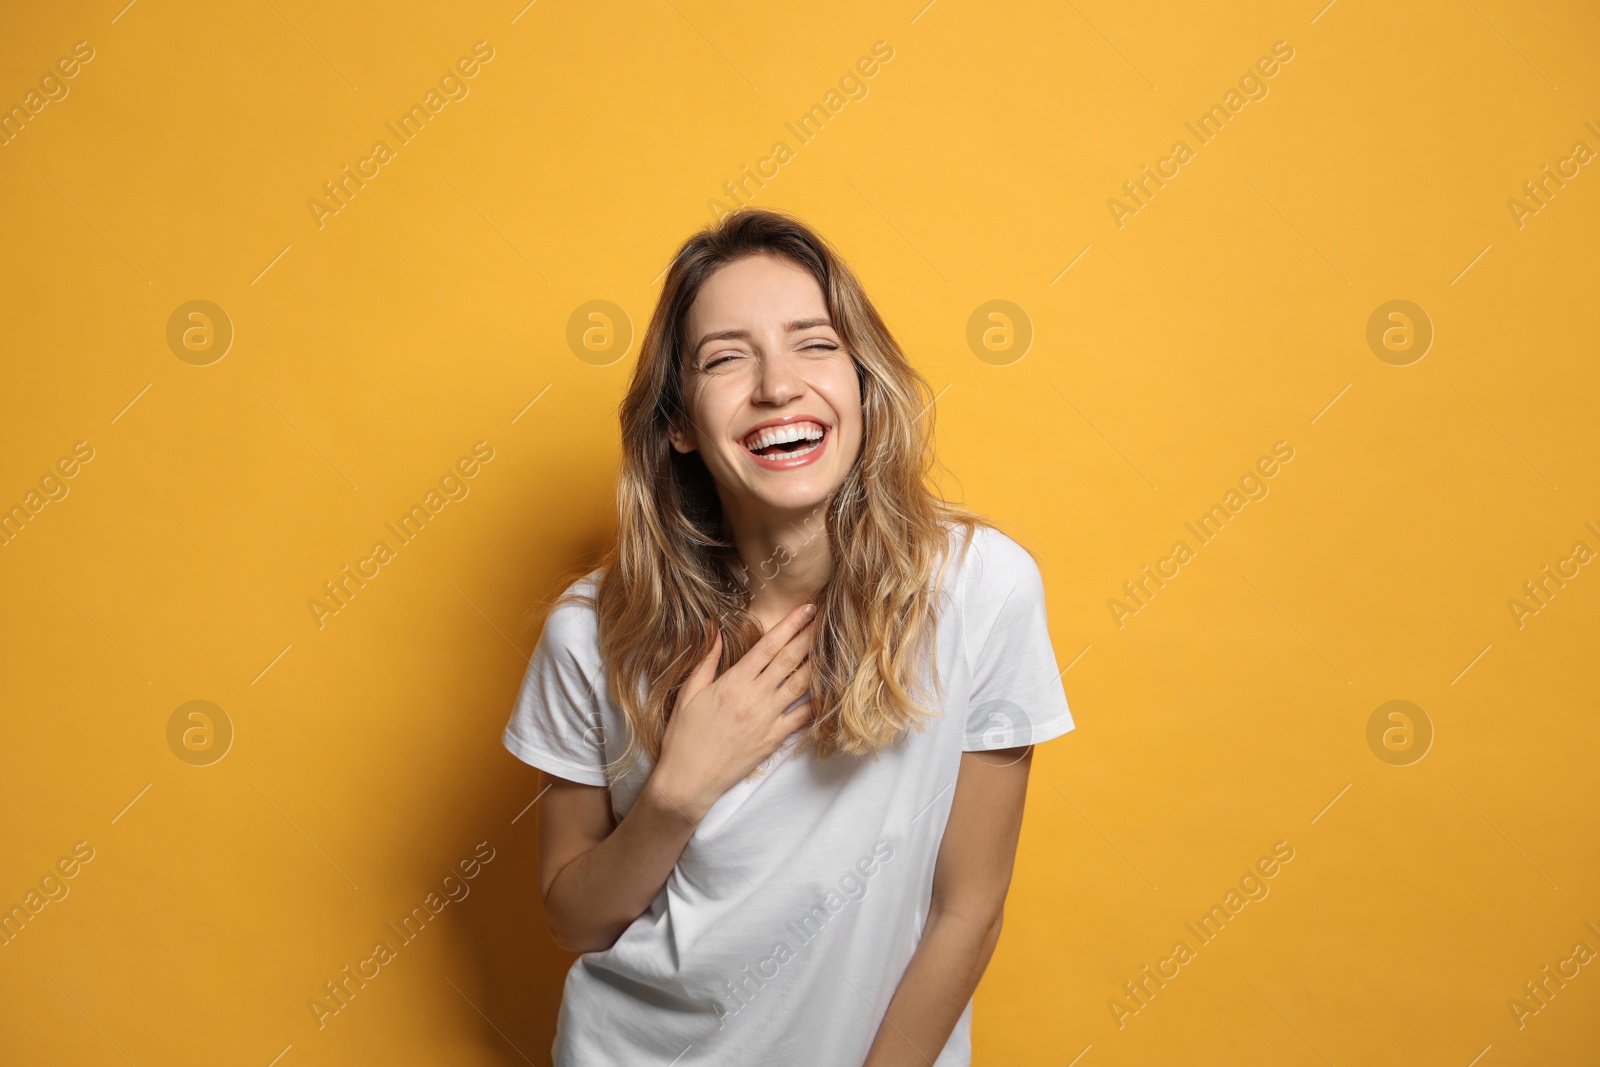 Photo of Cheerful young woman laughing on yellow background